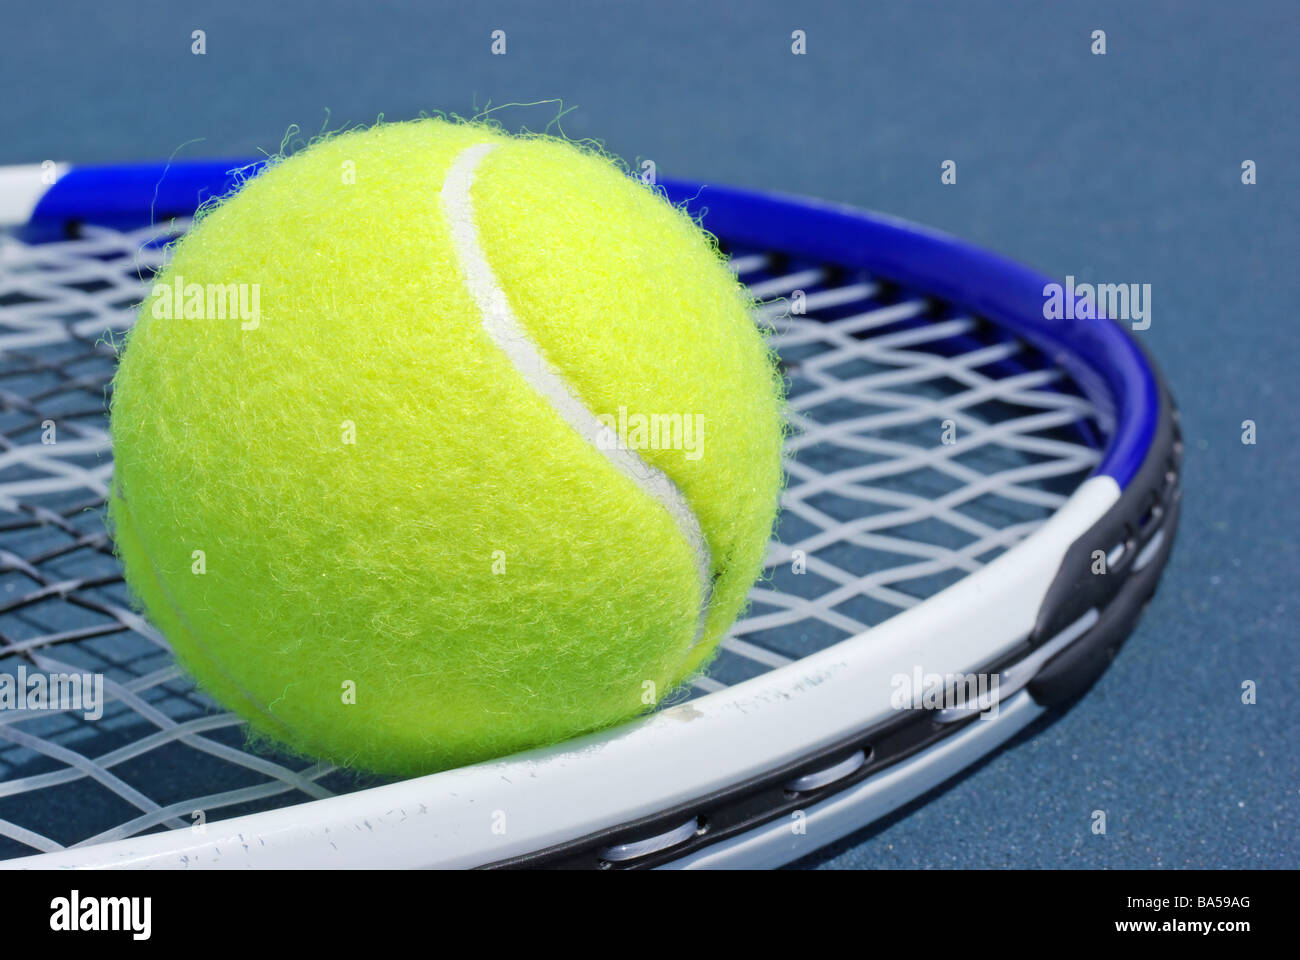 Tennis ball and racket on hard surface Stock Photo